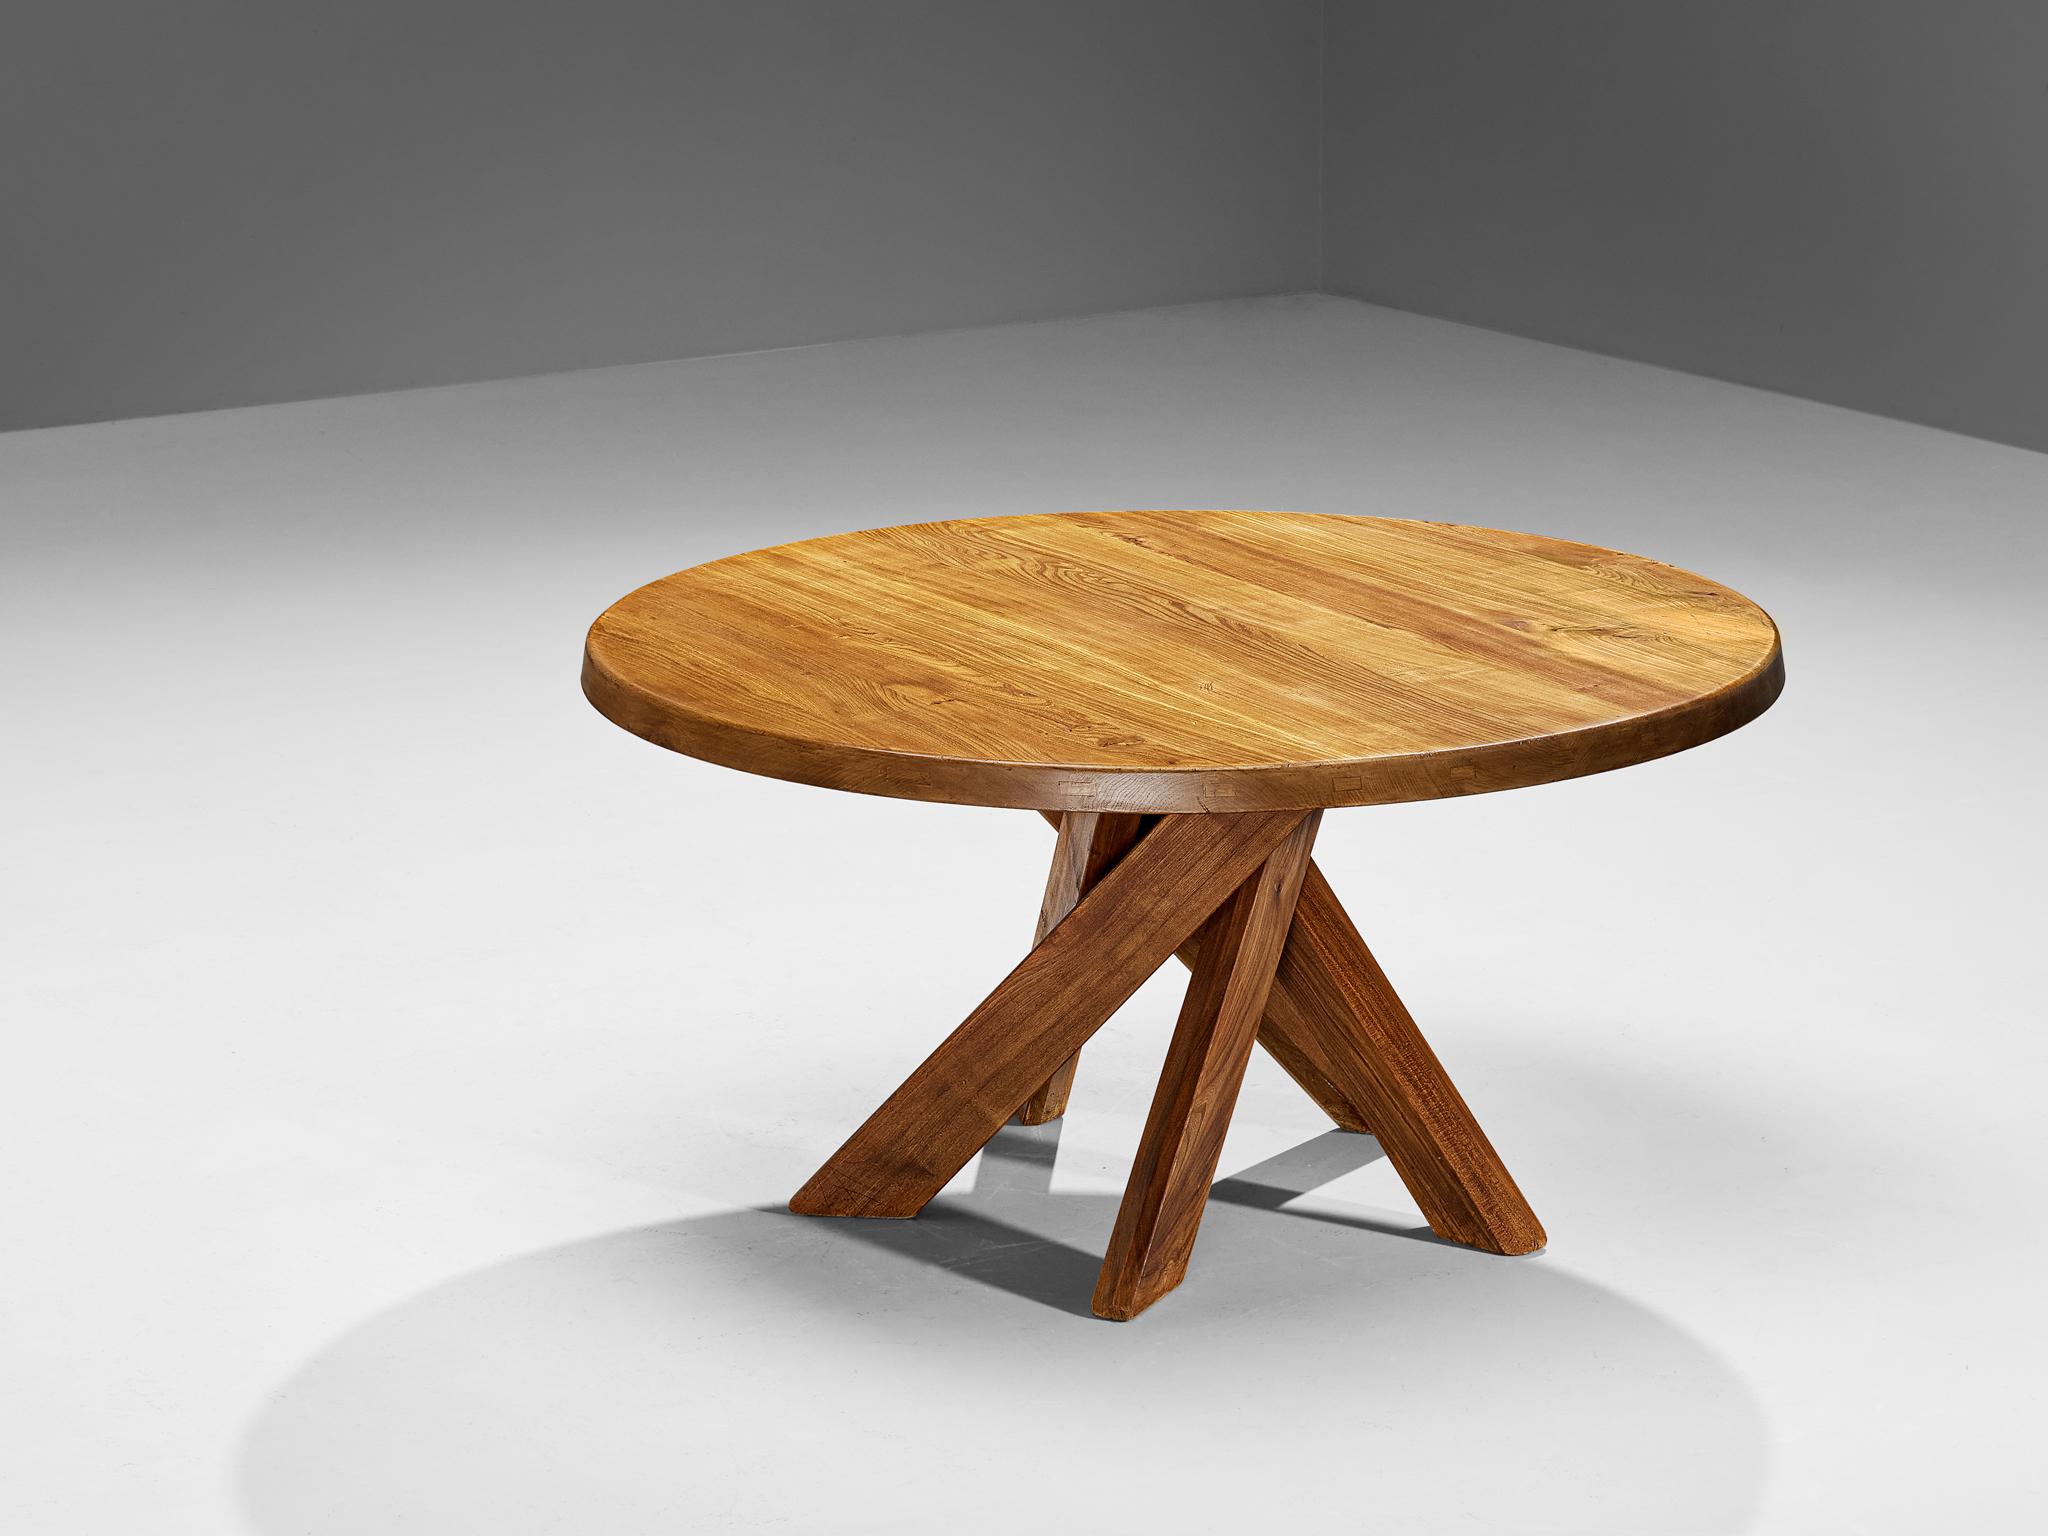 Pierre Chapo, dining table model 'T21 D', elm, France, 1970s

This table is one of the early editions designed by Pierre Chapo, known for his hallmark use of solid elmwood and a commitment to pure and clean design and construction principles. This